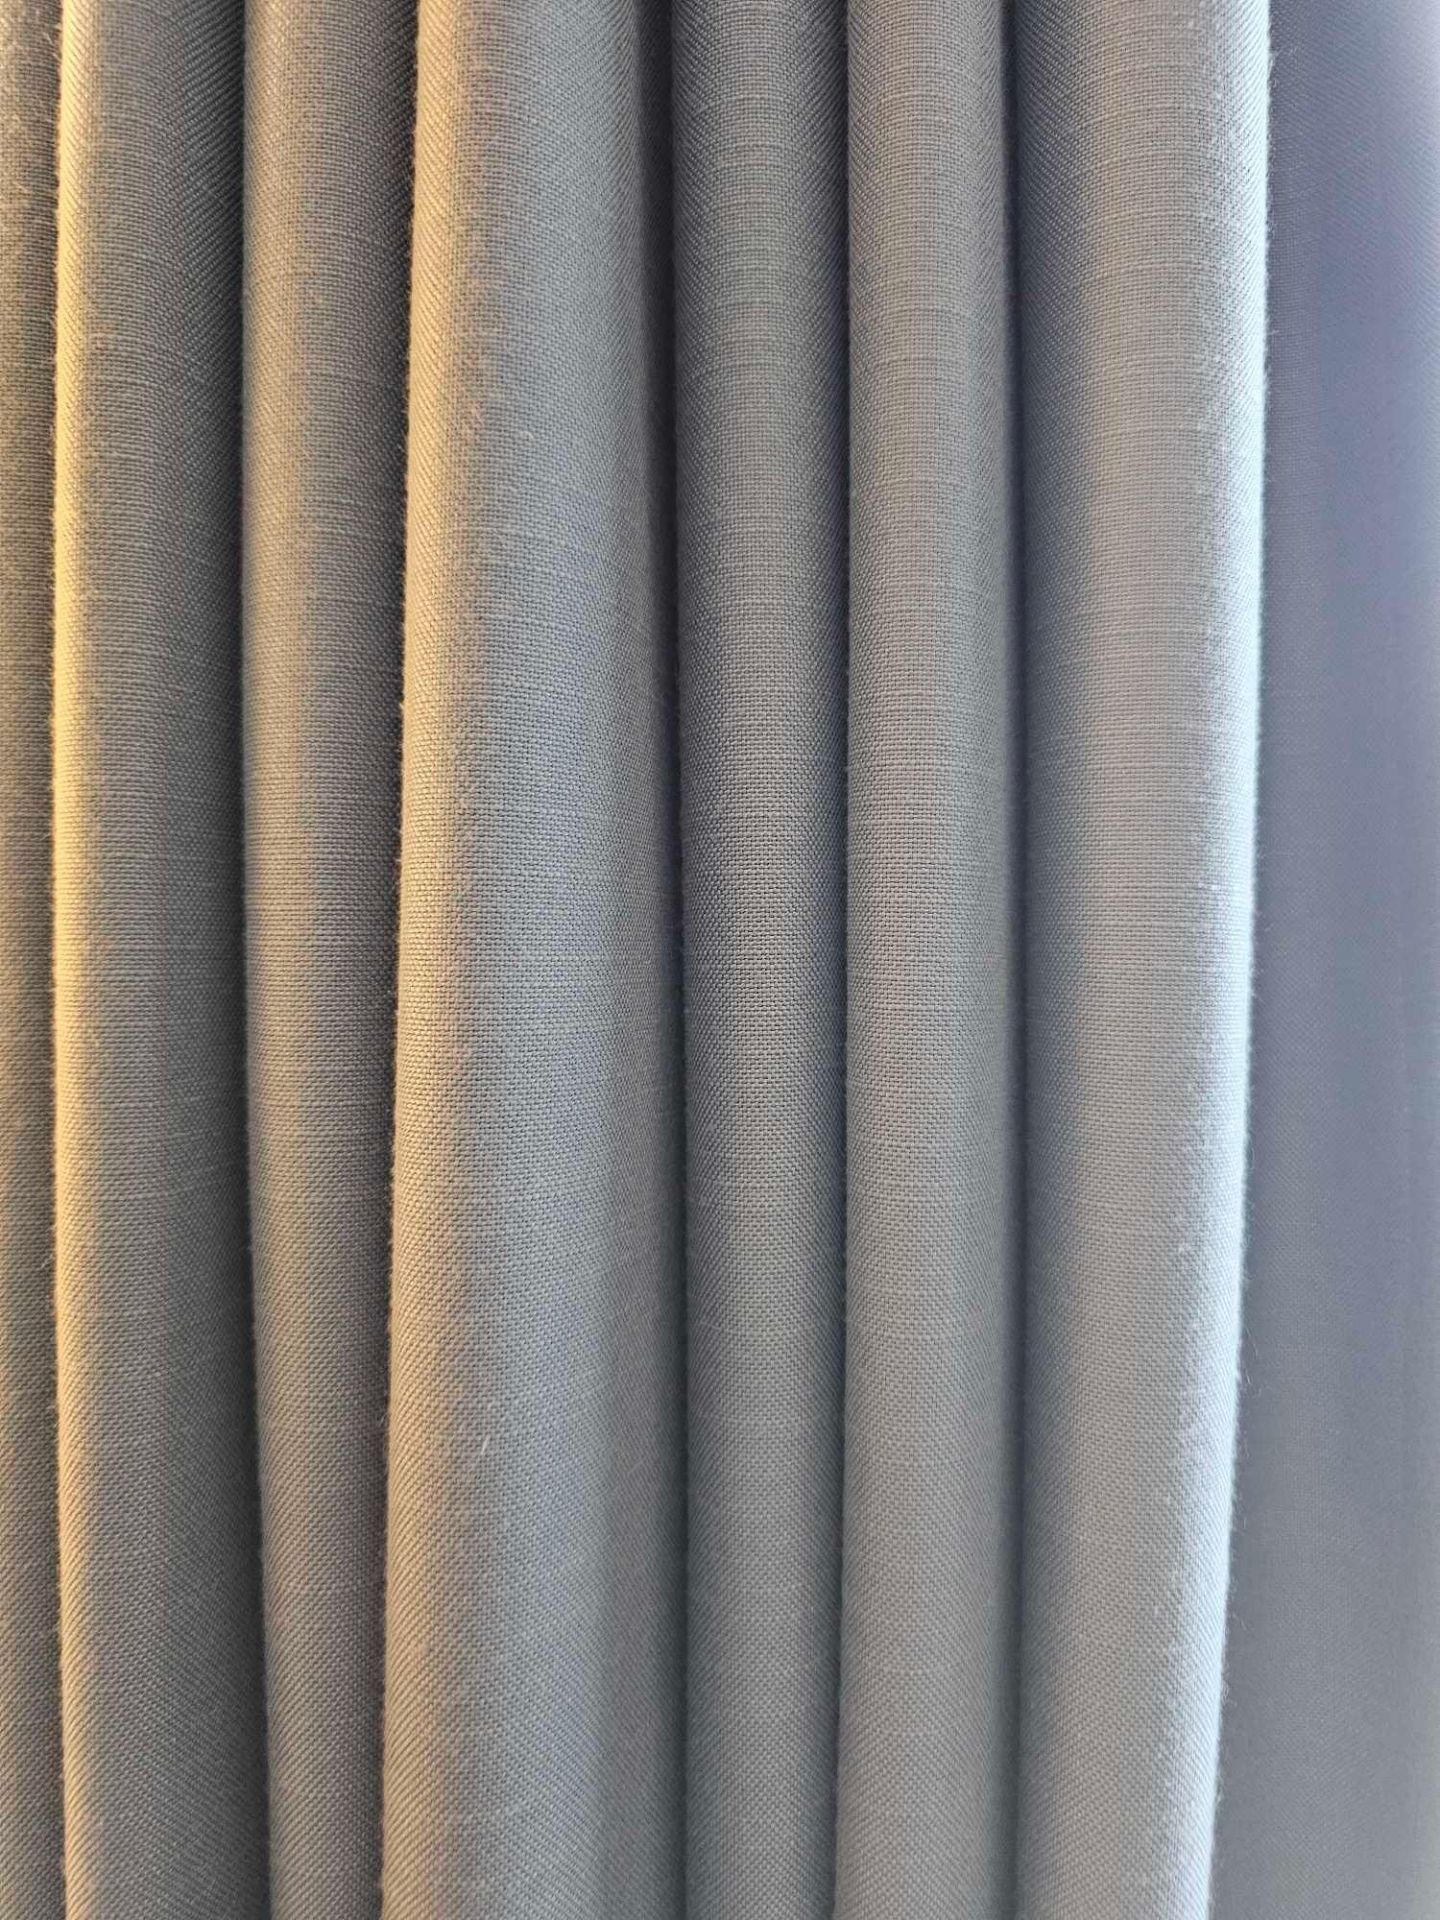 Drapes Blue Wove Linen Fully Lined With Pencil Pleat Top 180 x 280cm (Loc: Room 130) - Image 2 of 3